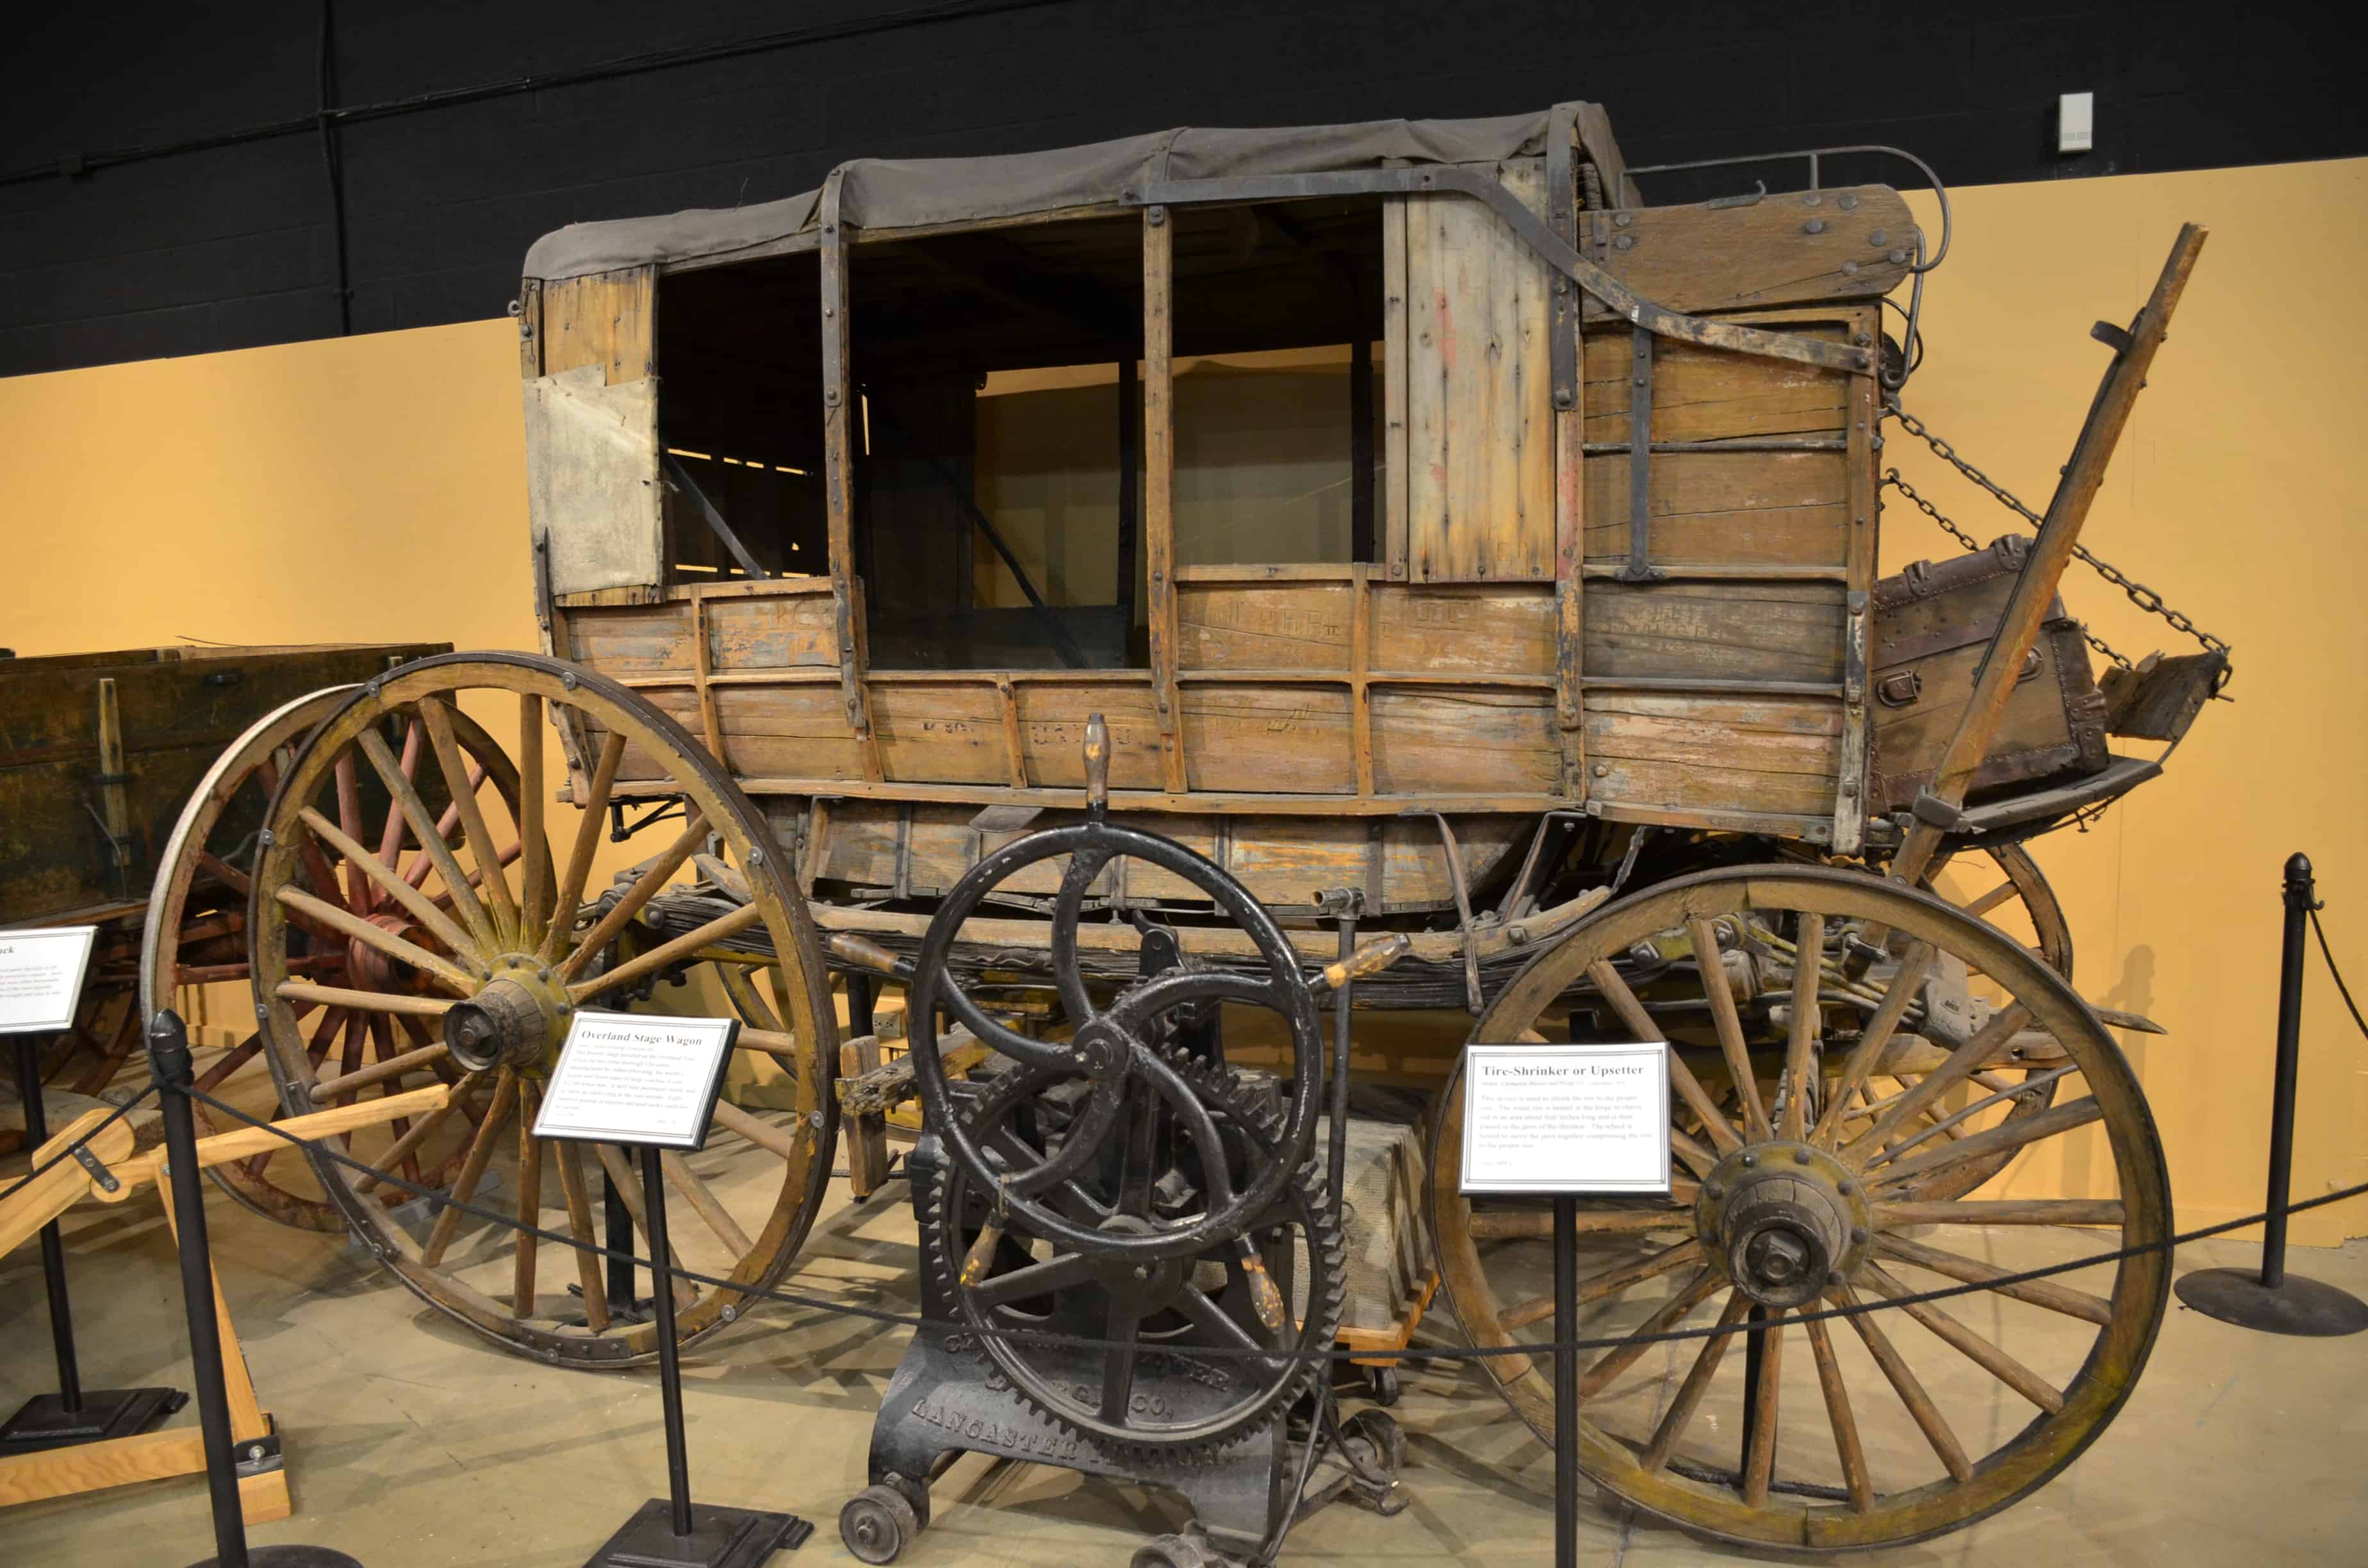 Overland carriage at the Cheyenne Frontier Days Old West Museum in Wyoming